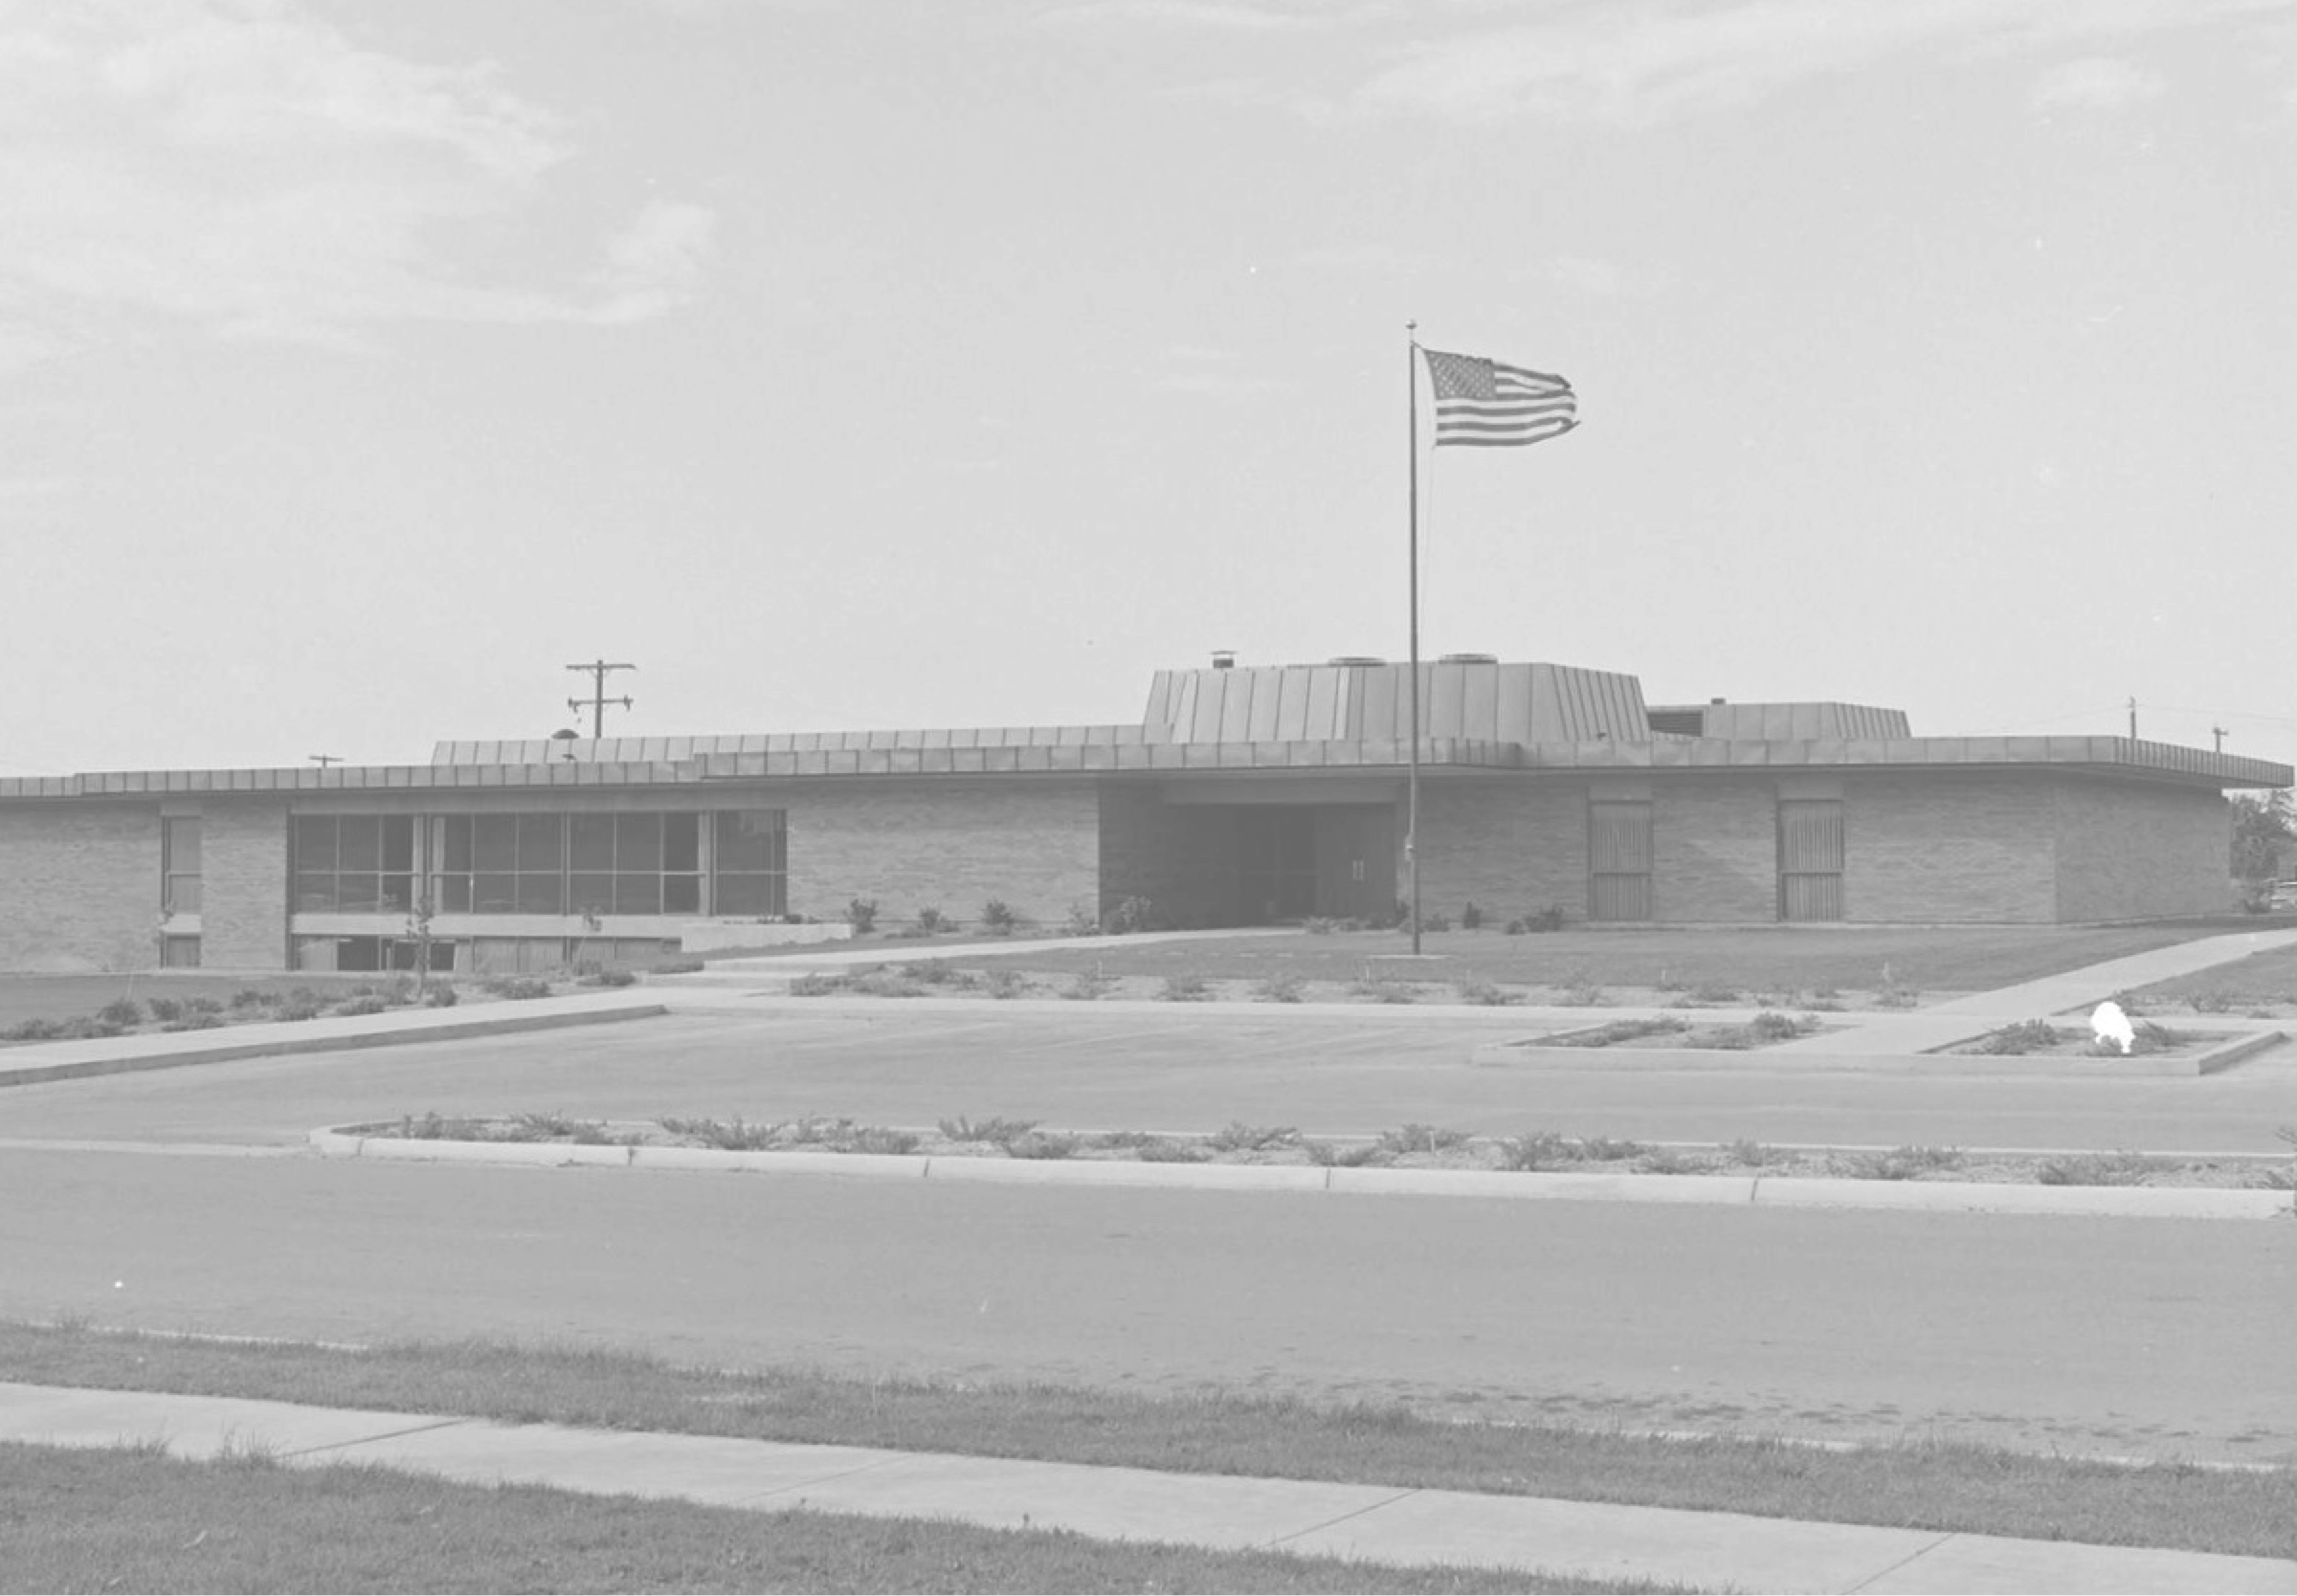 A municipal building with the American flag flying at full staff in the foreground